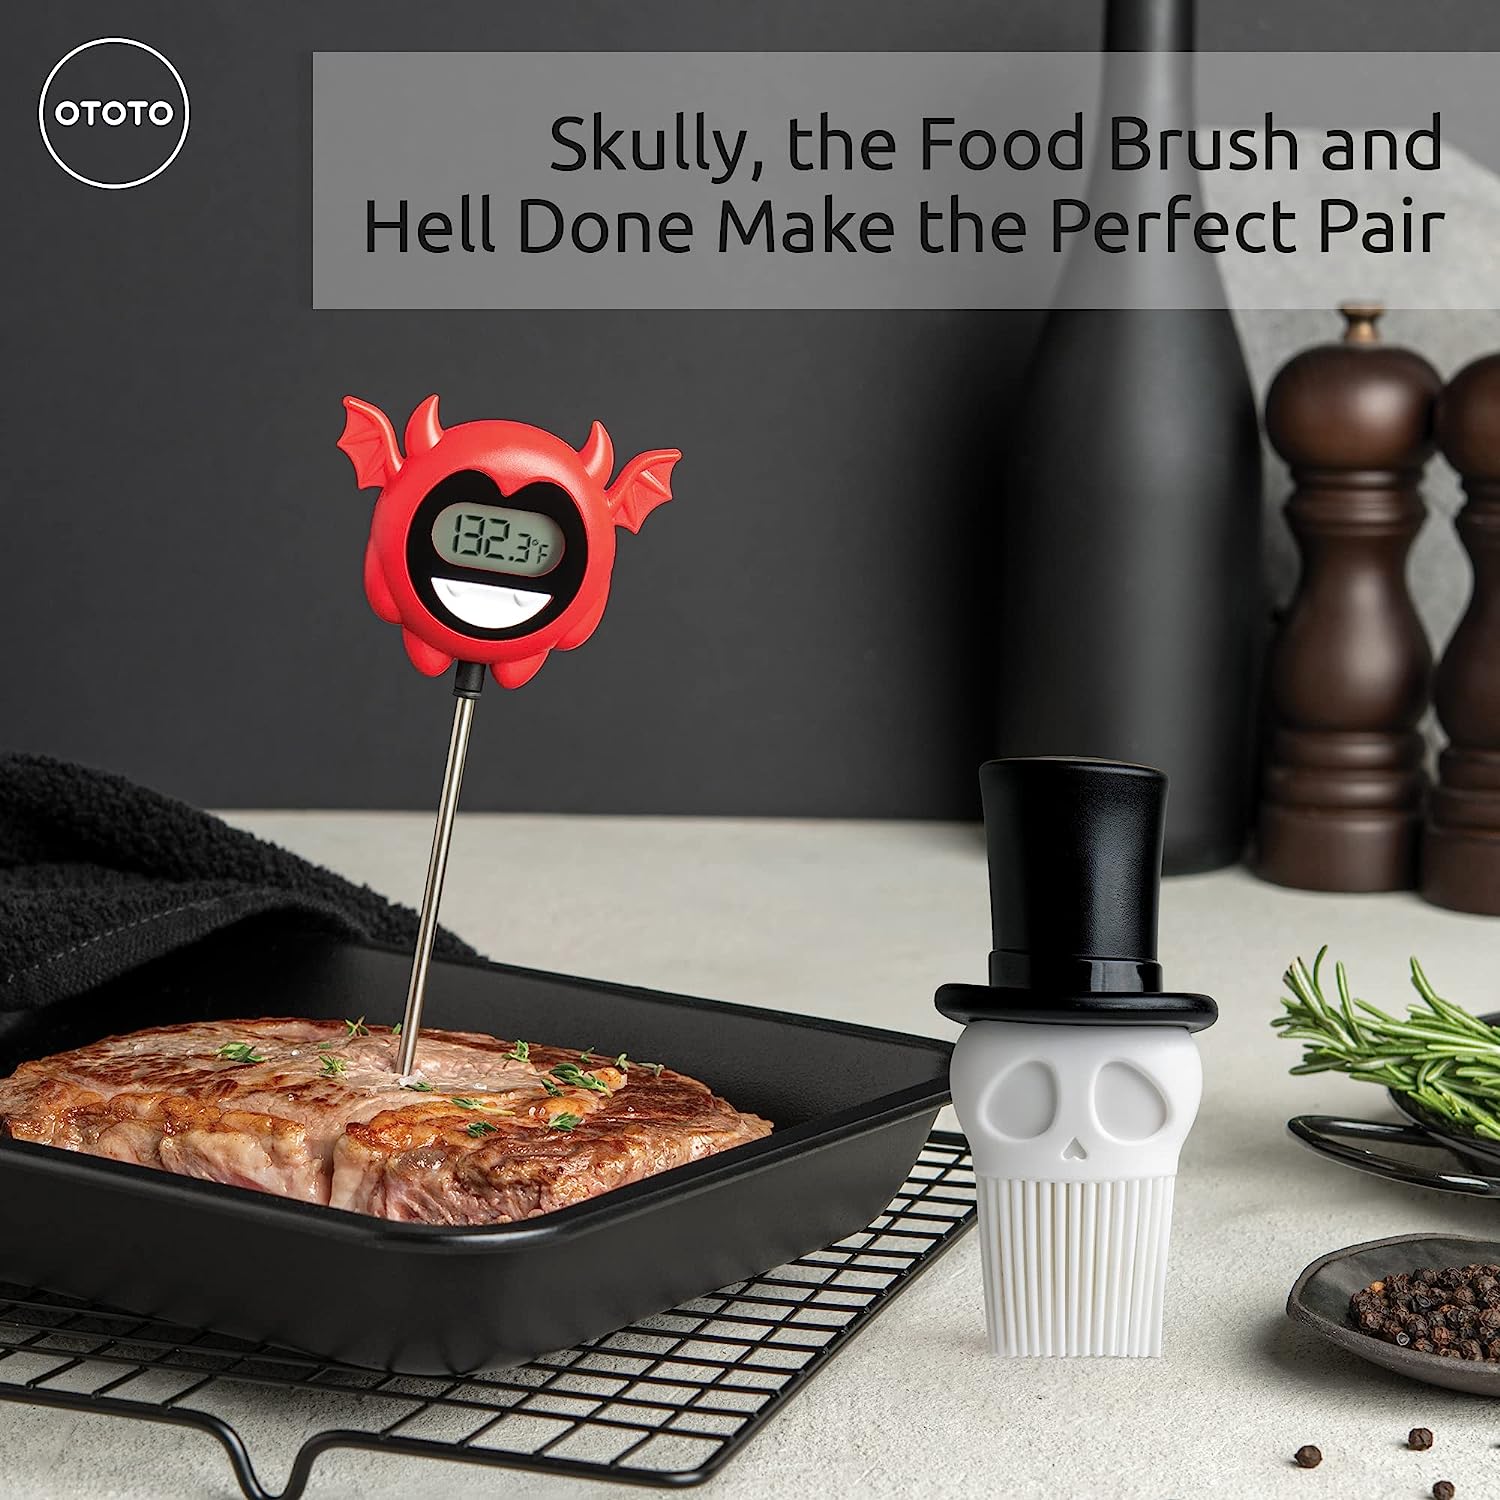 The probe of a meat thermometer called Hell Done is inside a steak checking the temperature.